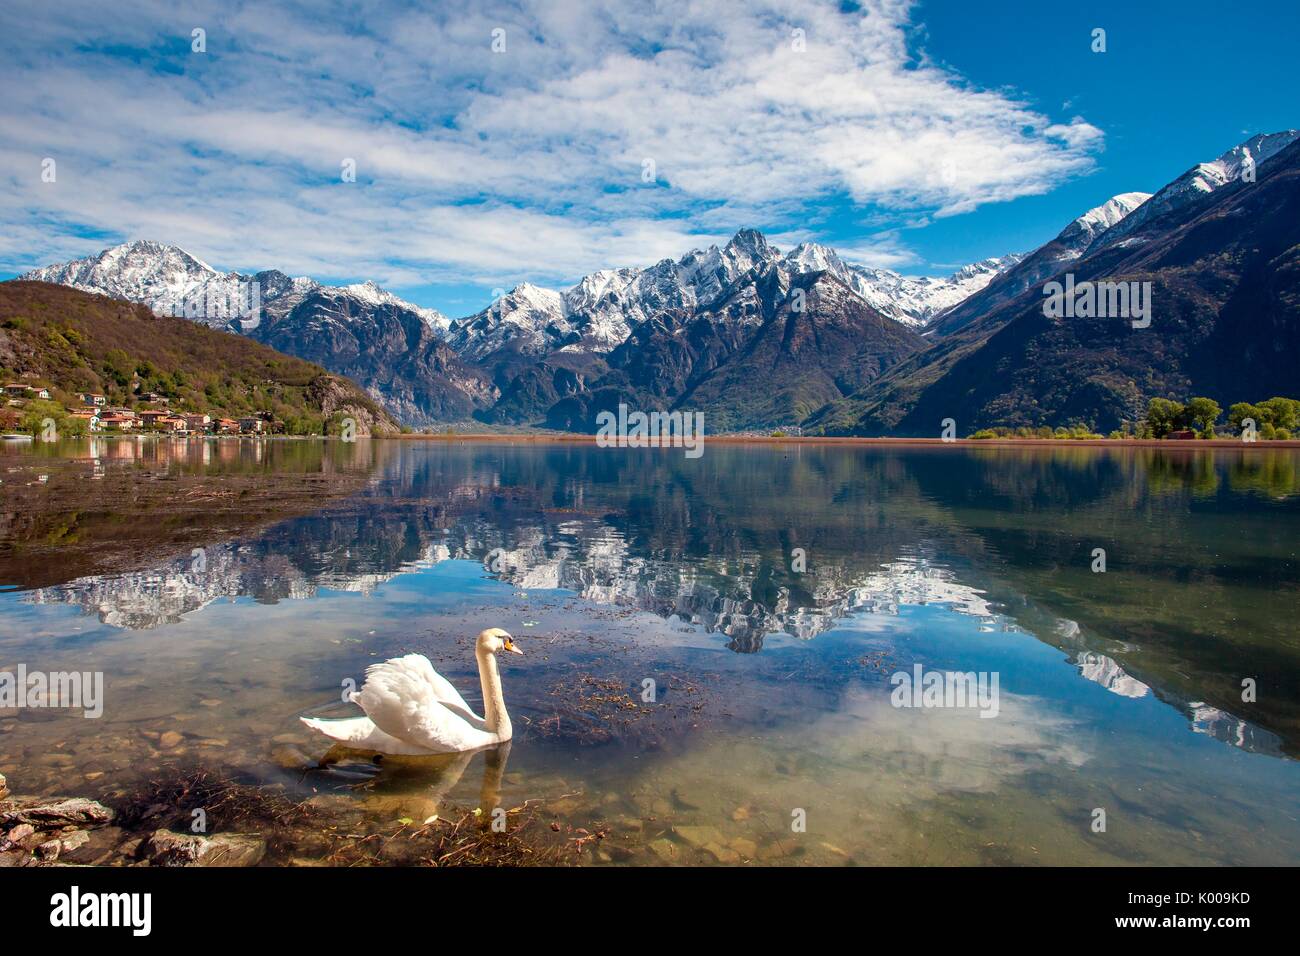 A solitary swan gliding in the Lake in Novate Mezzola whose waters reflect the granitic Sasso Manduino, Valchiavenna, Italy Stock Photo